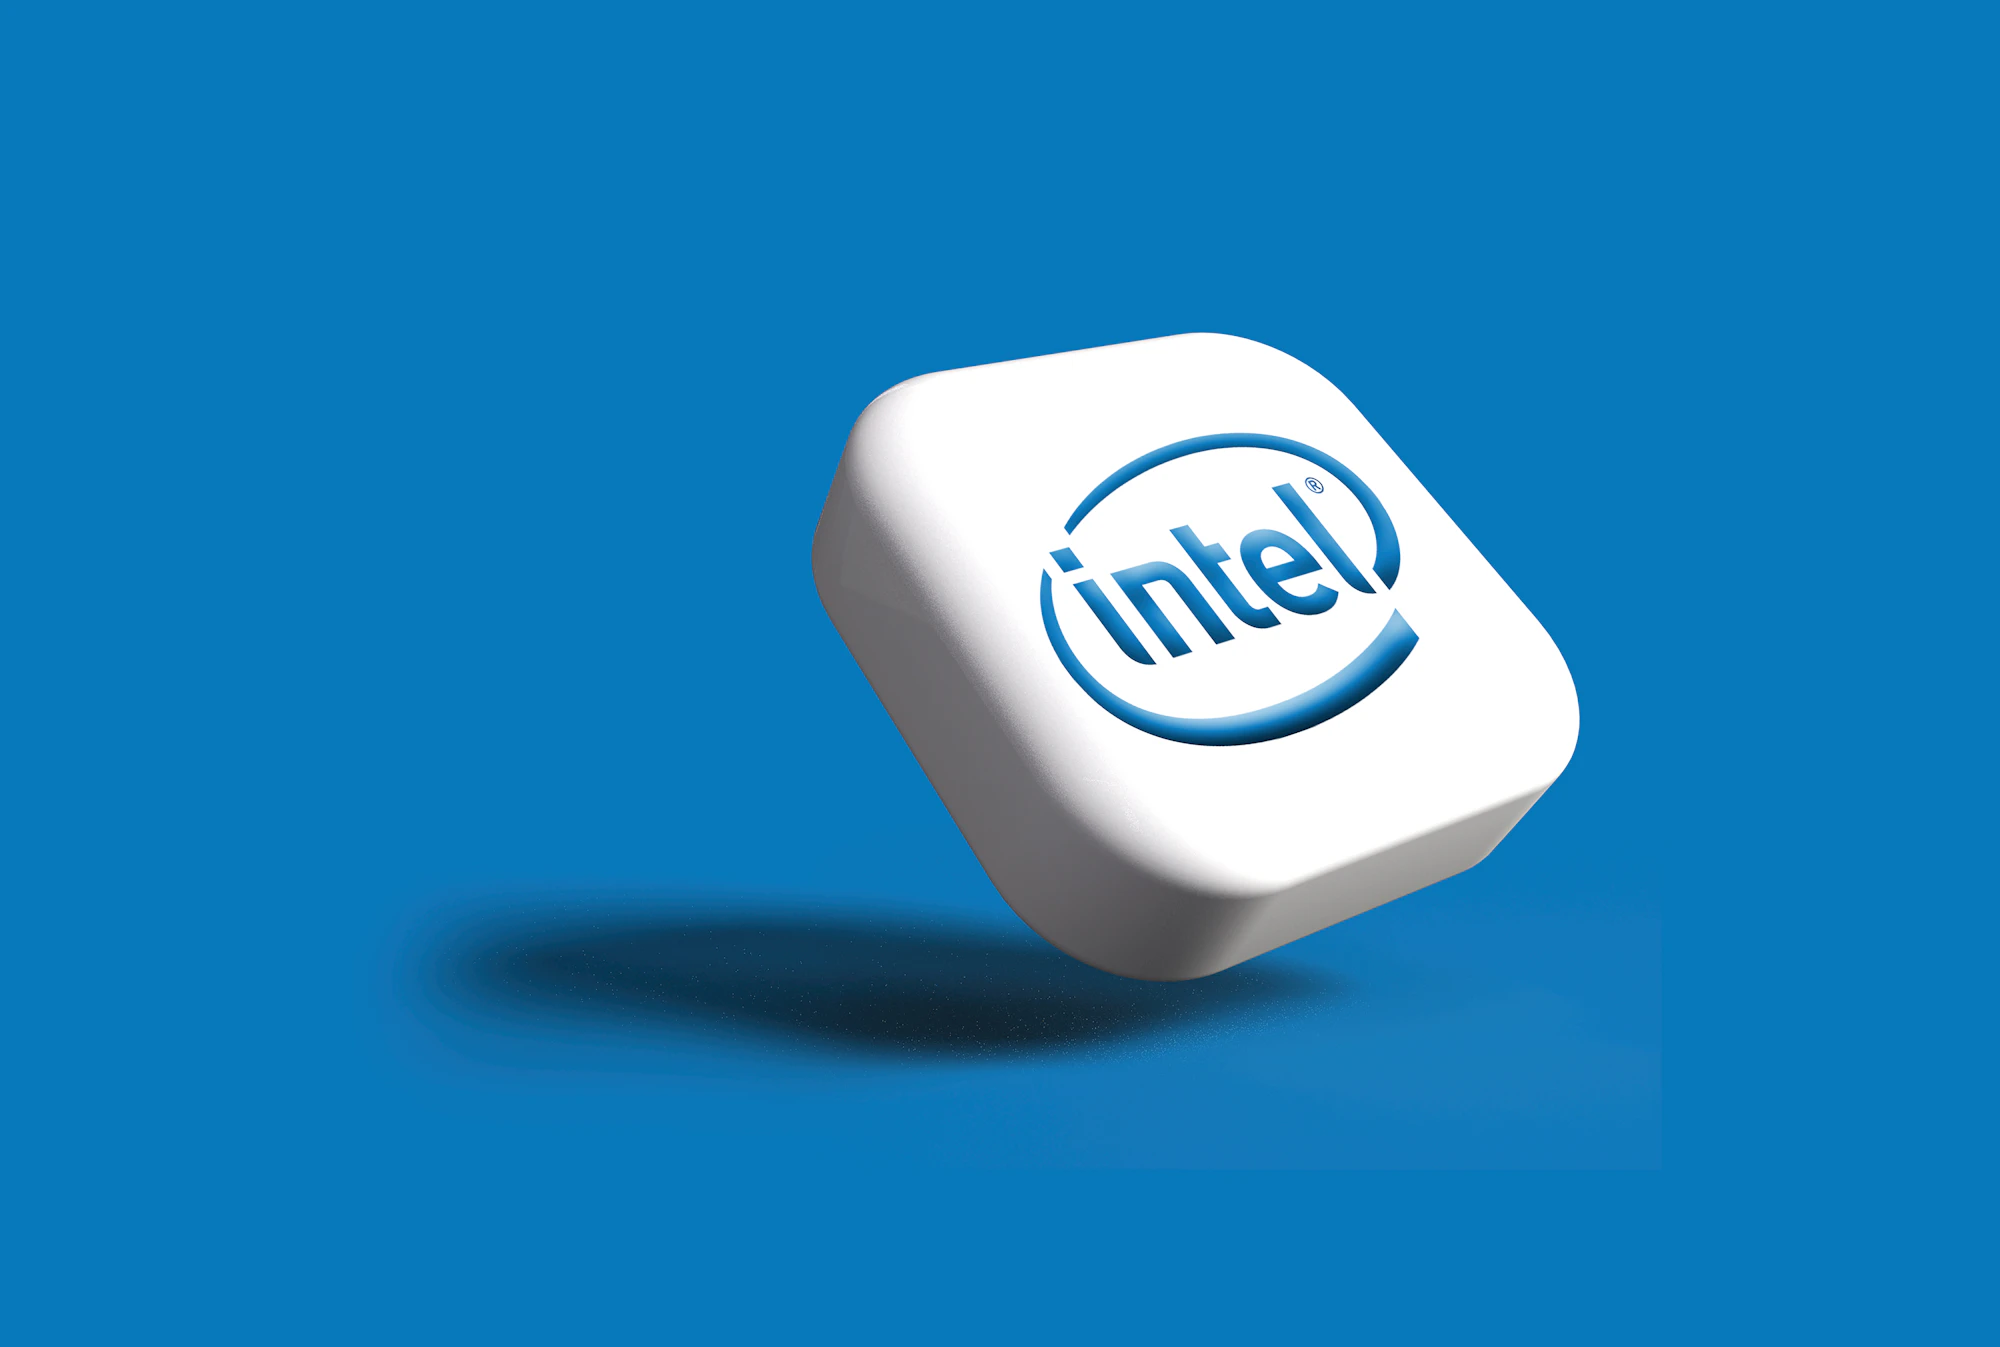 Here's why Intel anticipates a transition from mobile to PC gaming in India